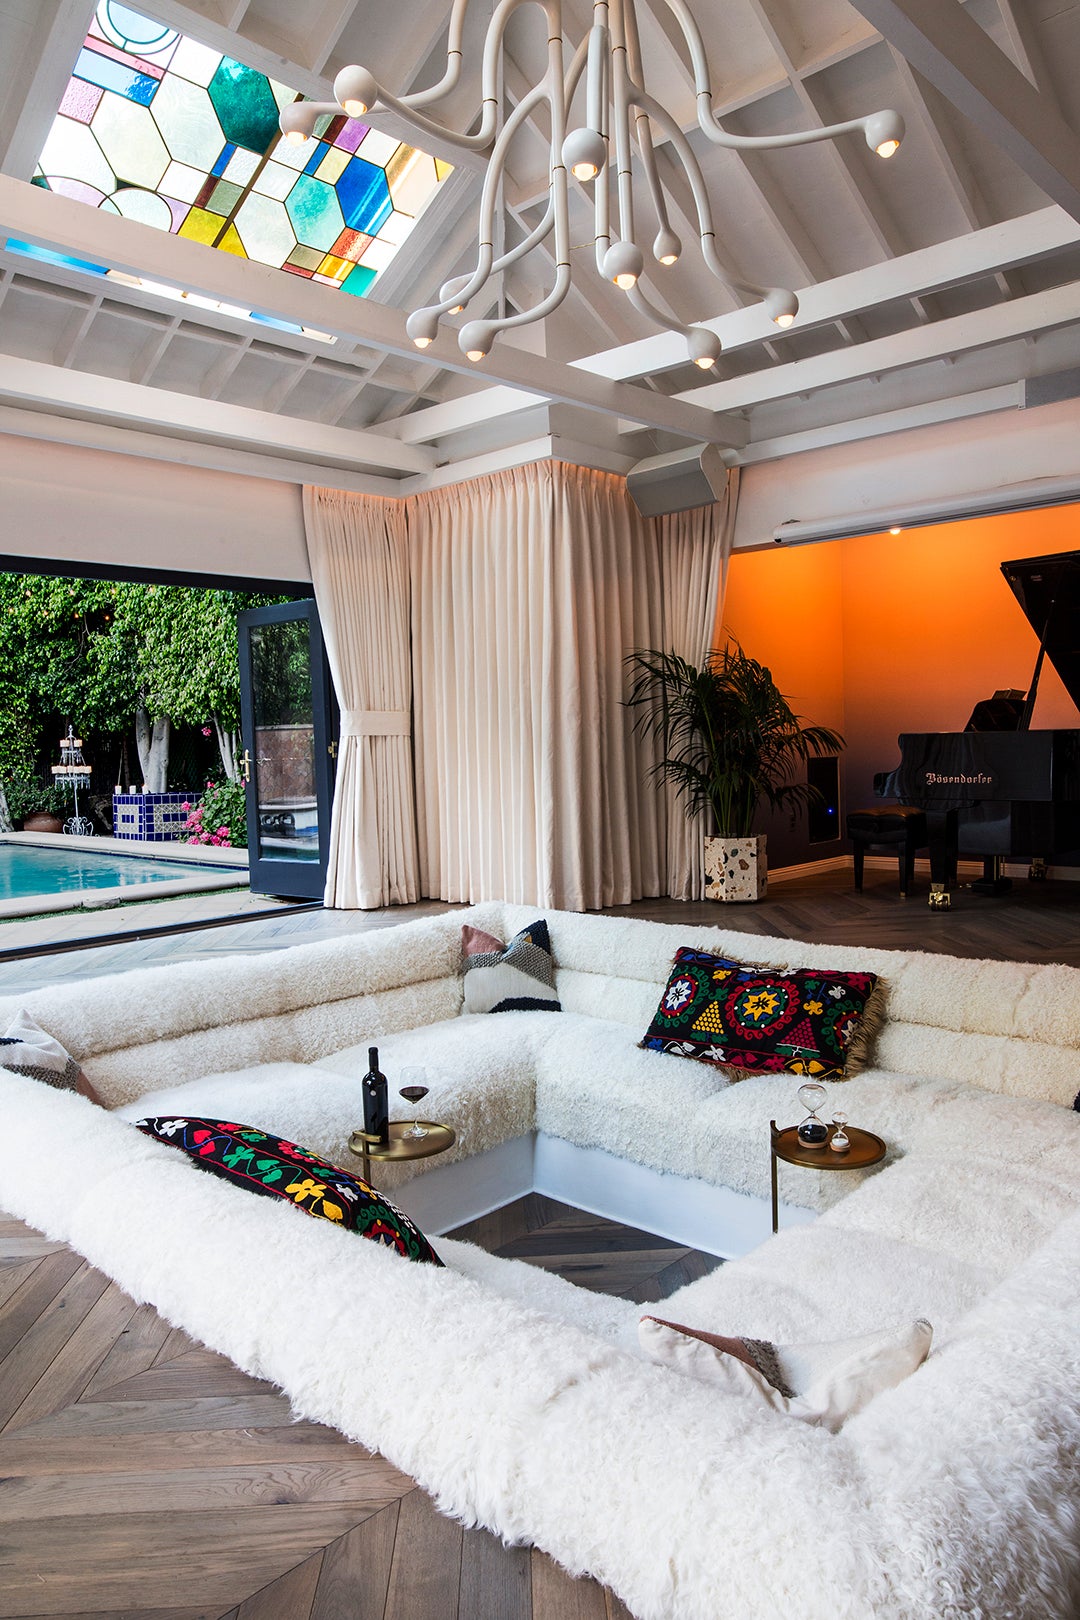 The Sunken Sofa in This 8-in-1 Pool House Rightfully Earned the Name “Cuddle Puddle”